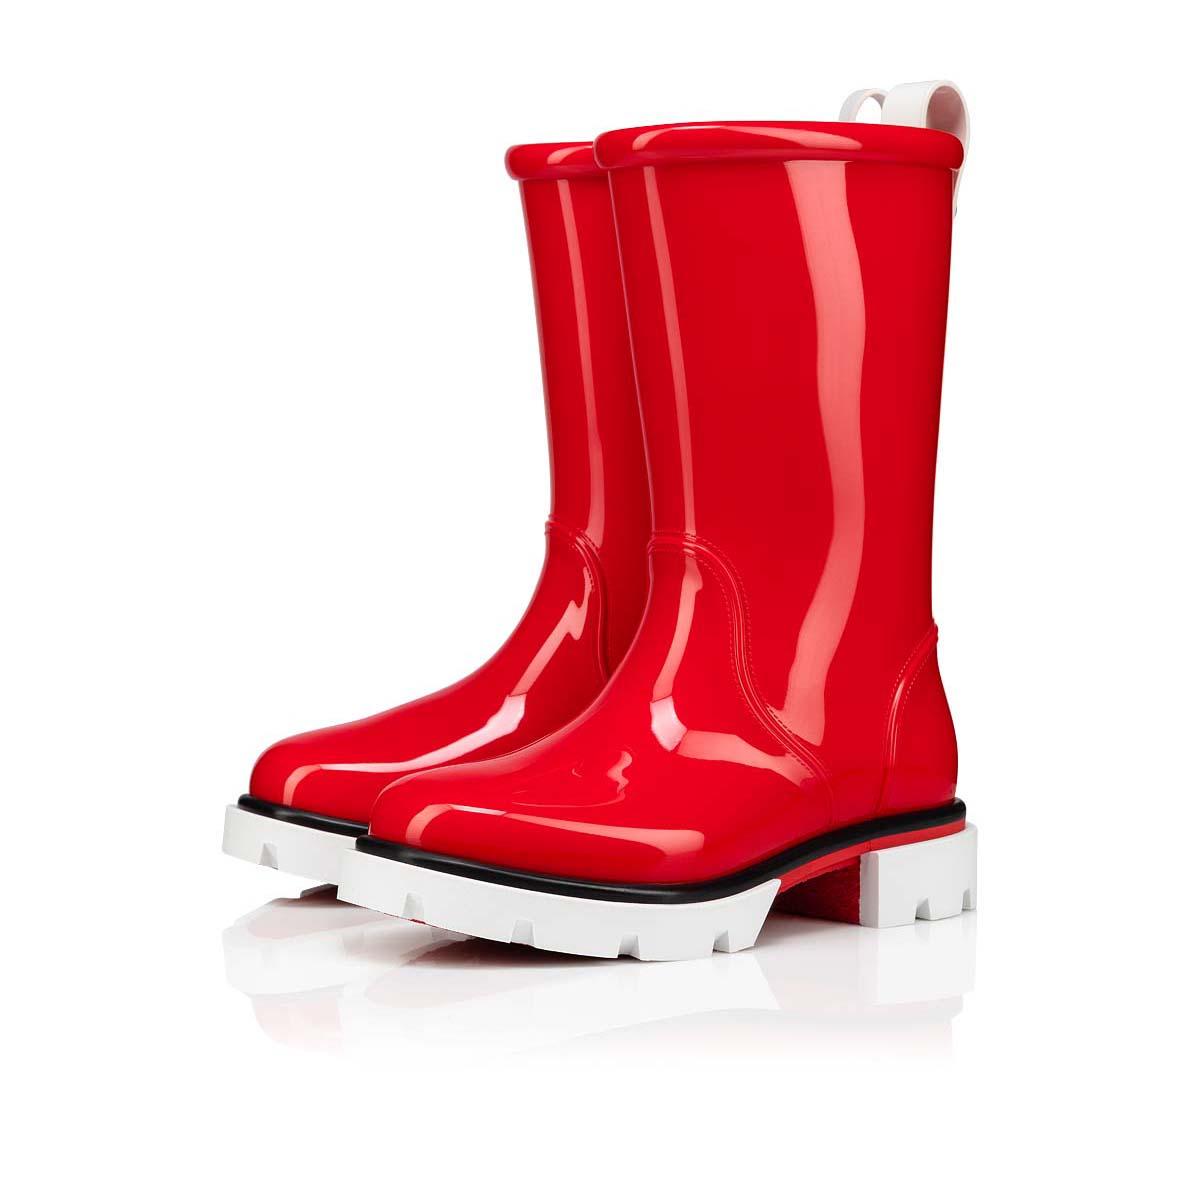 Toy Pluie Rubber Boots in Red - Christian Louboutin Kids